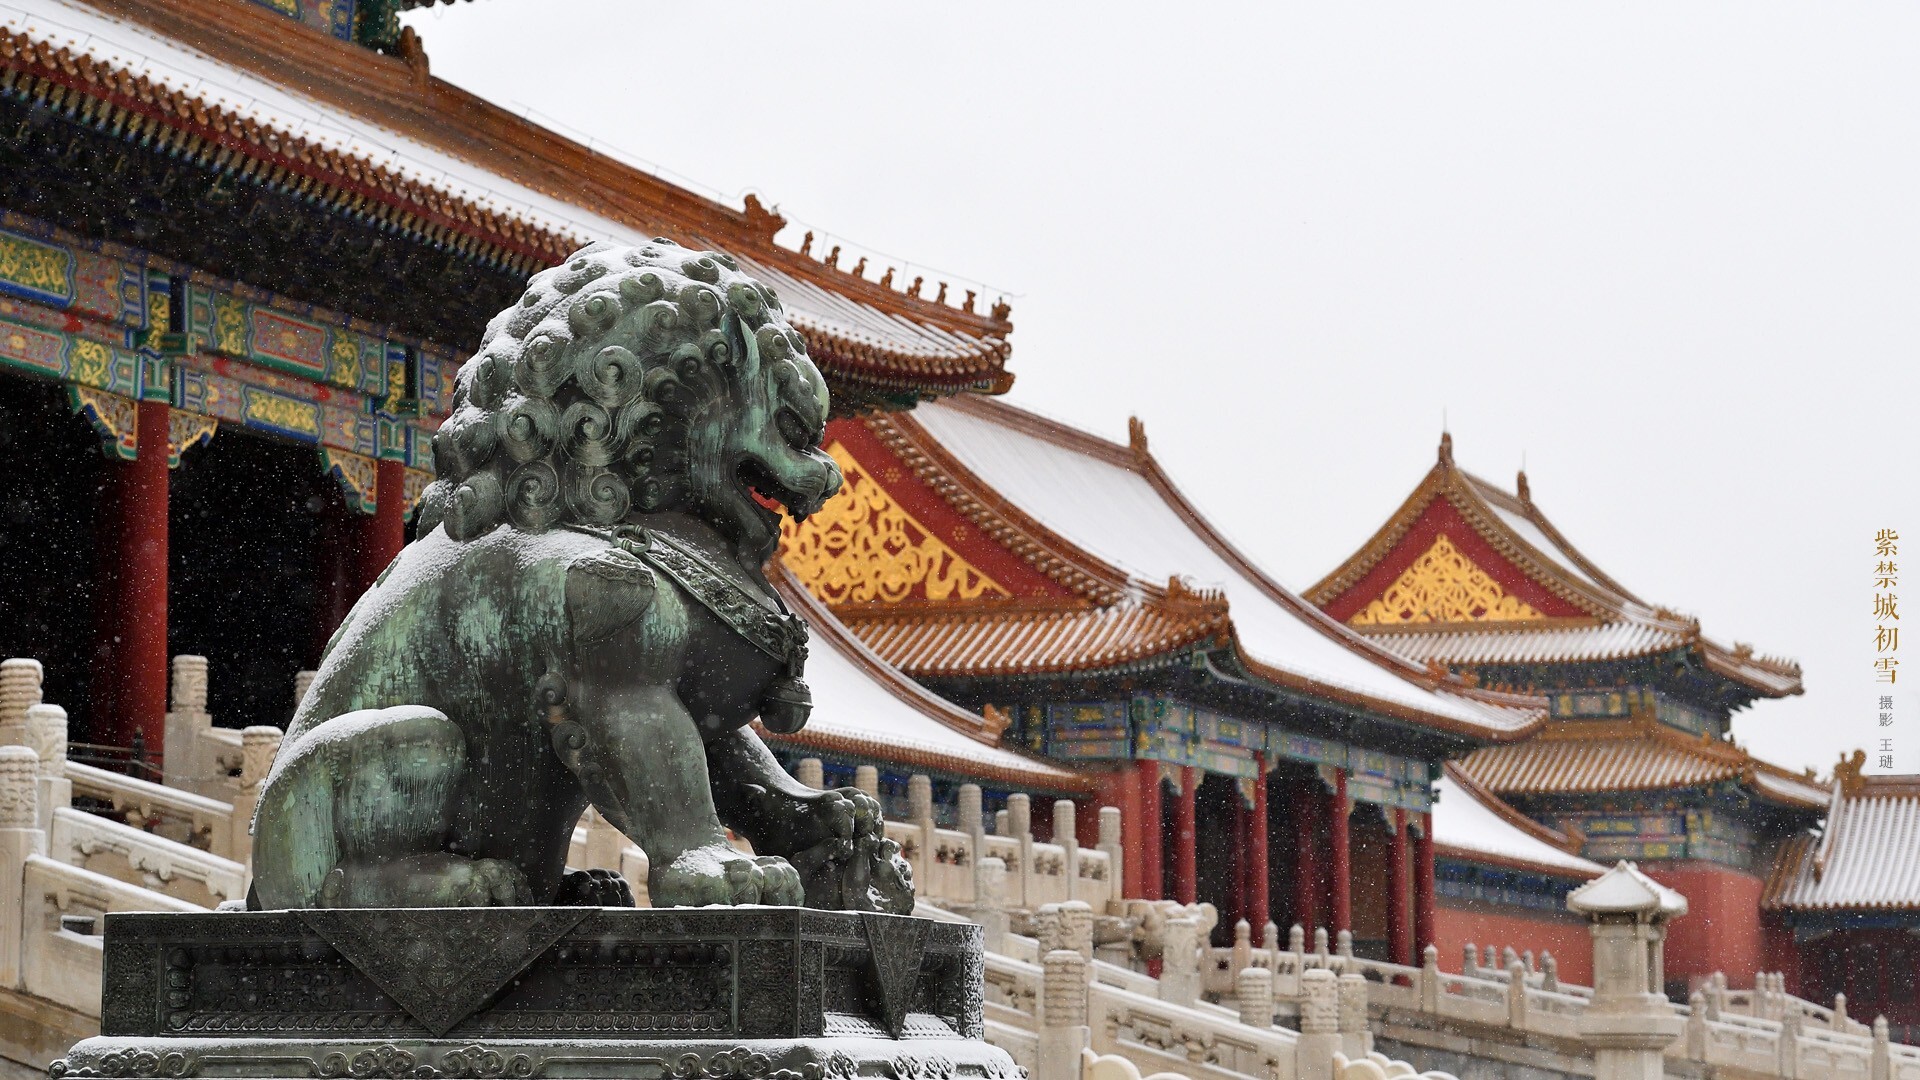 From royal residence to popular period drama setting, Beijing’s Forbidden City continues to inspire awe 600 years after construction. Photo: Palace Museum